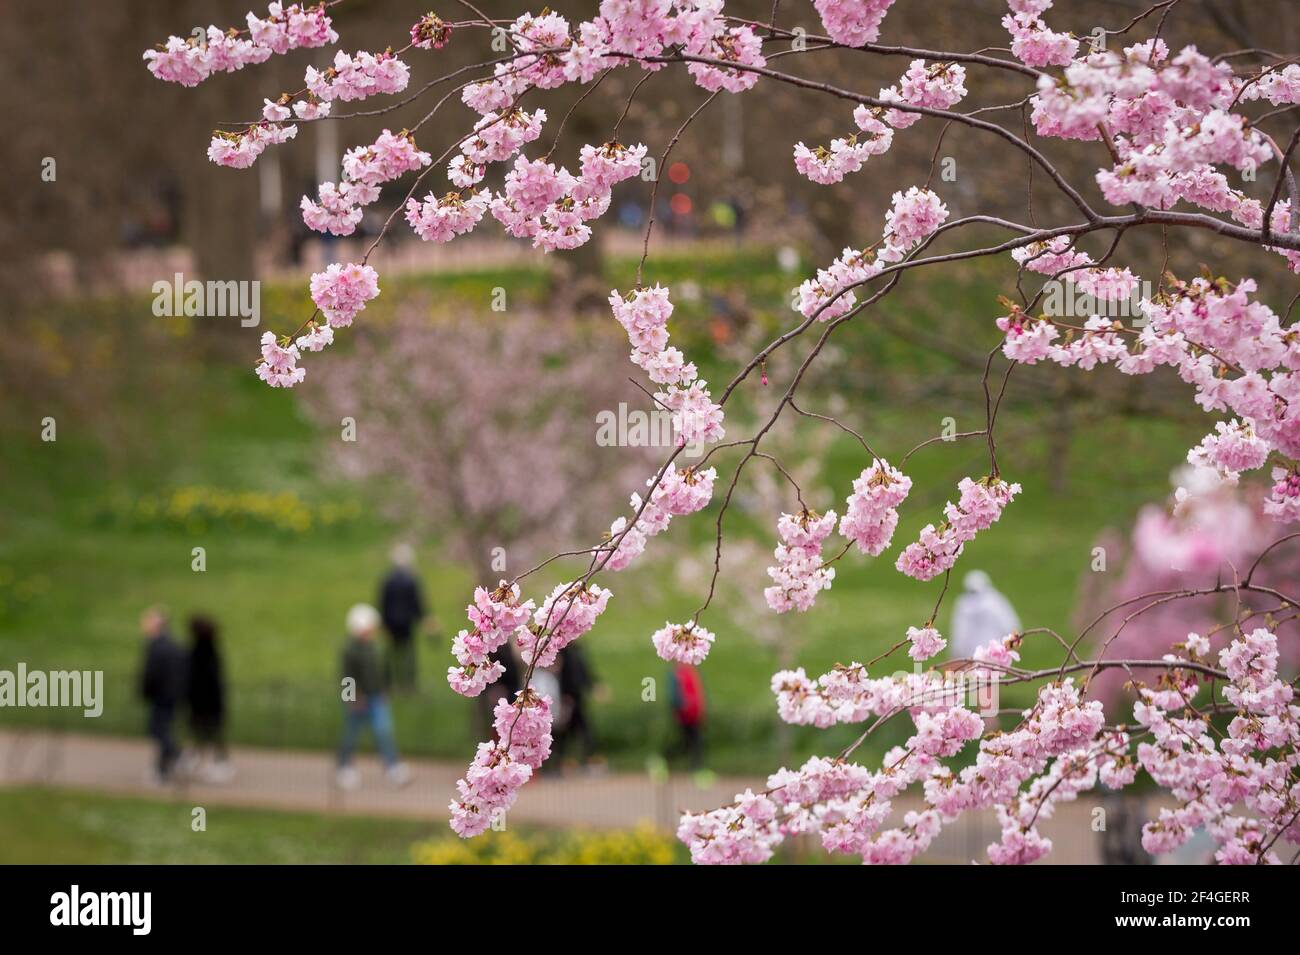 London, UK.  21 March 2021. UK Weather – People admire the blossom flowering in St James’s Park on the first weekend of Spring following the vernal equinox. From now on, the northern hemisphere will experience longer days and warmer temperatures.  Credit: Stephen Chung / Alamy Live News Stock Photo